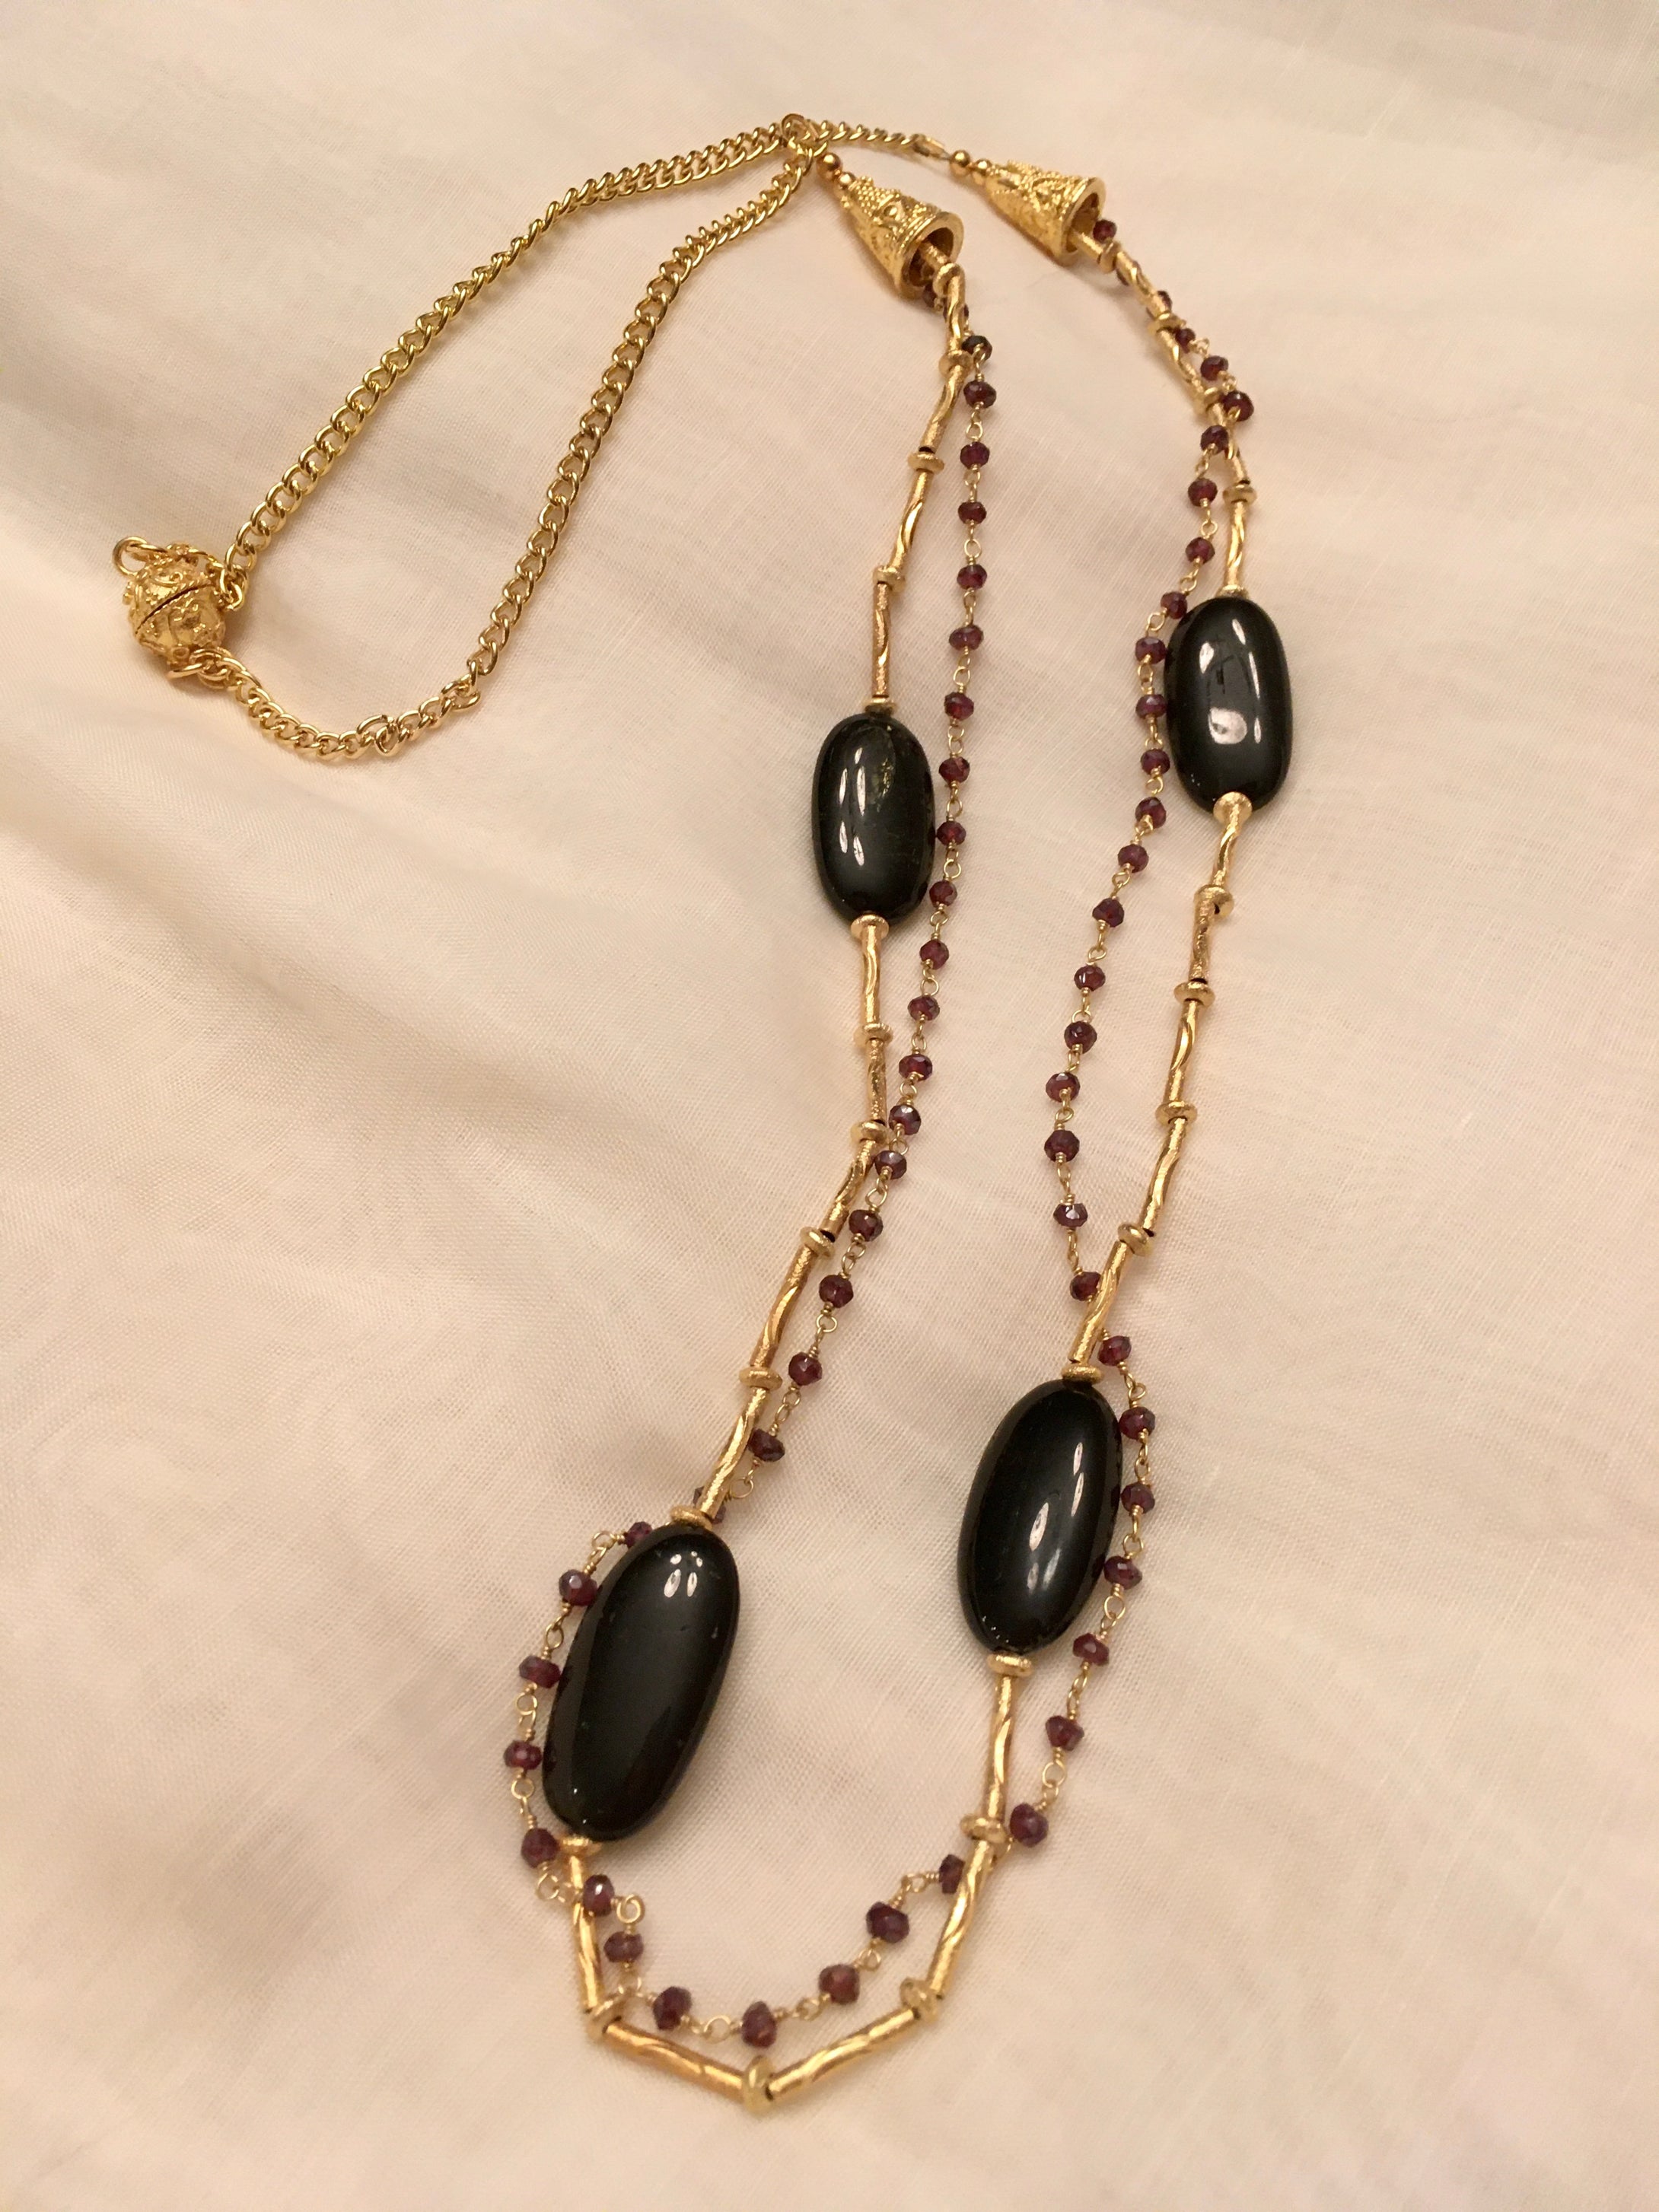 Green Tourmaline Ovals and Mystic Garnet Gold Chain, Plated Gold.  29 1/2